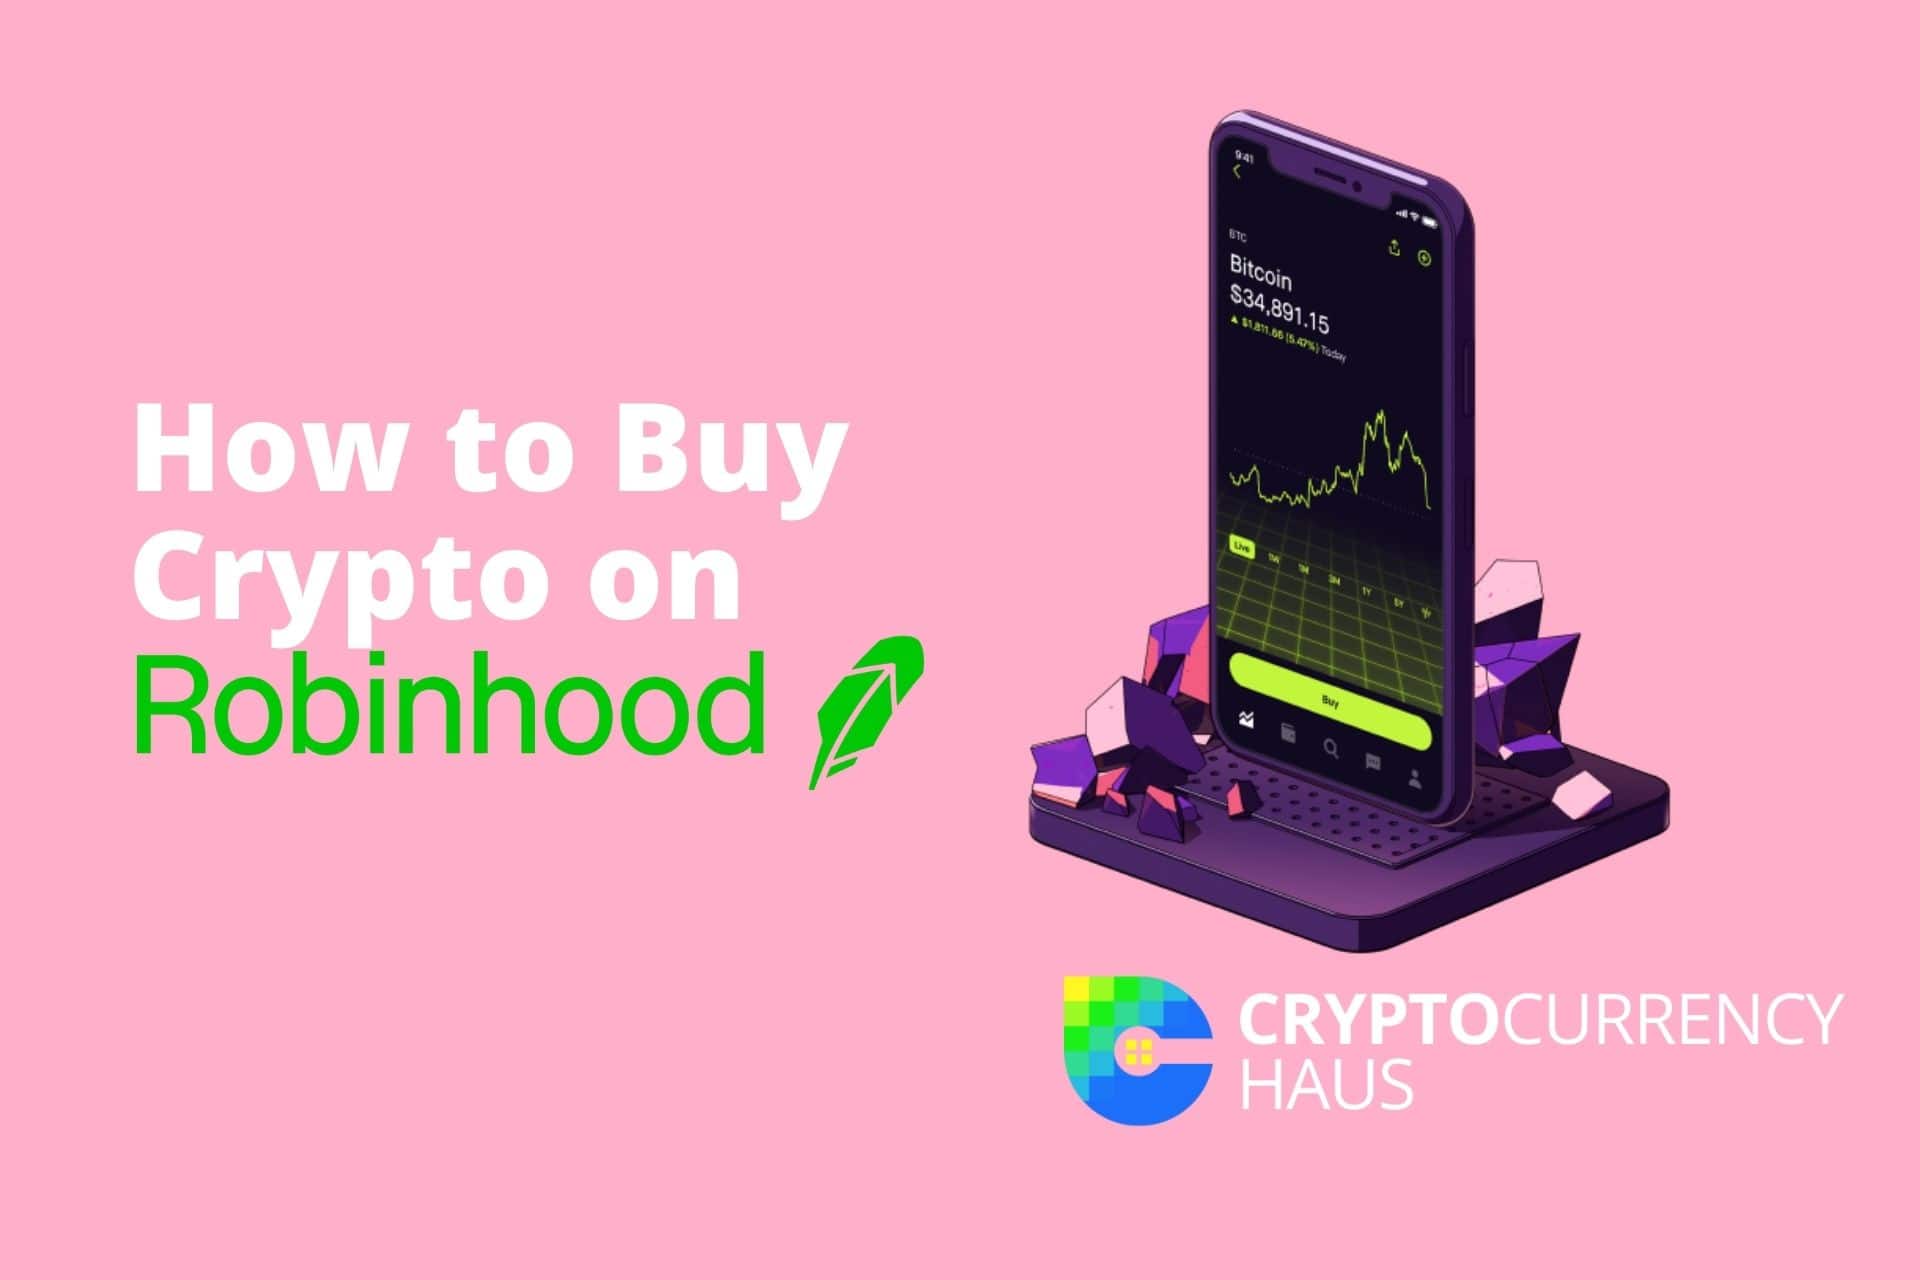 does buying crypto on robinhood affect the price